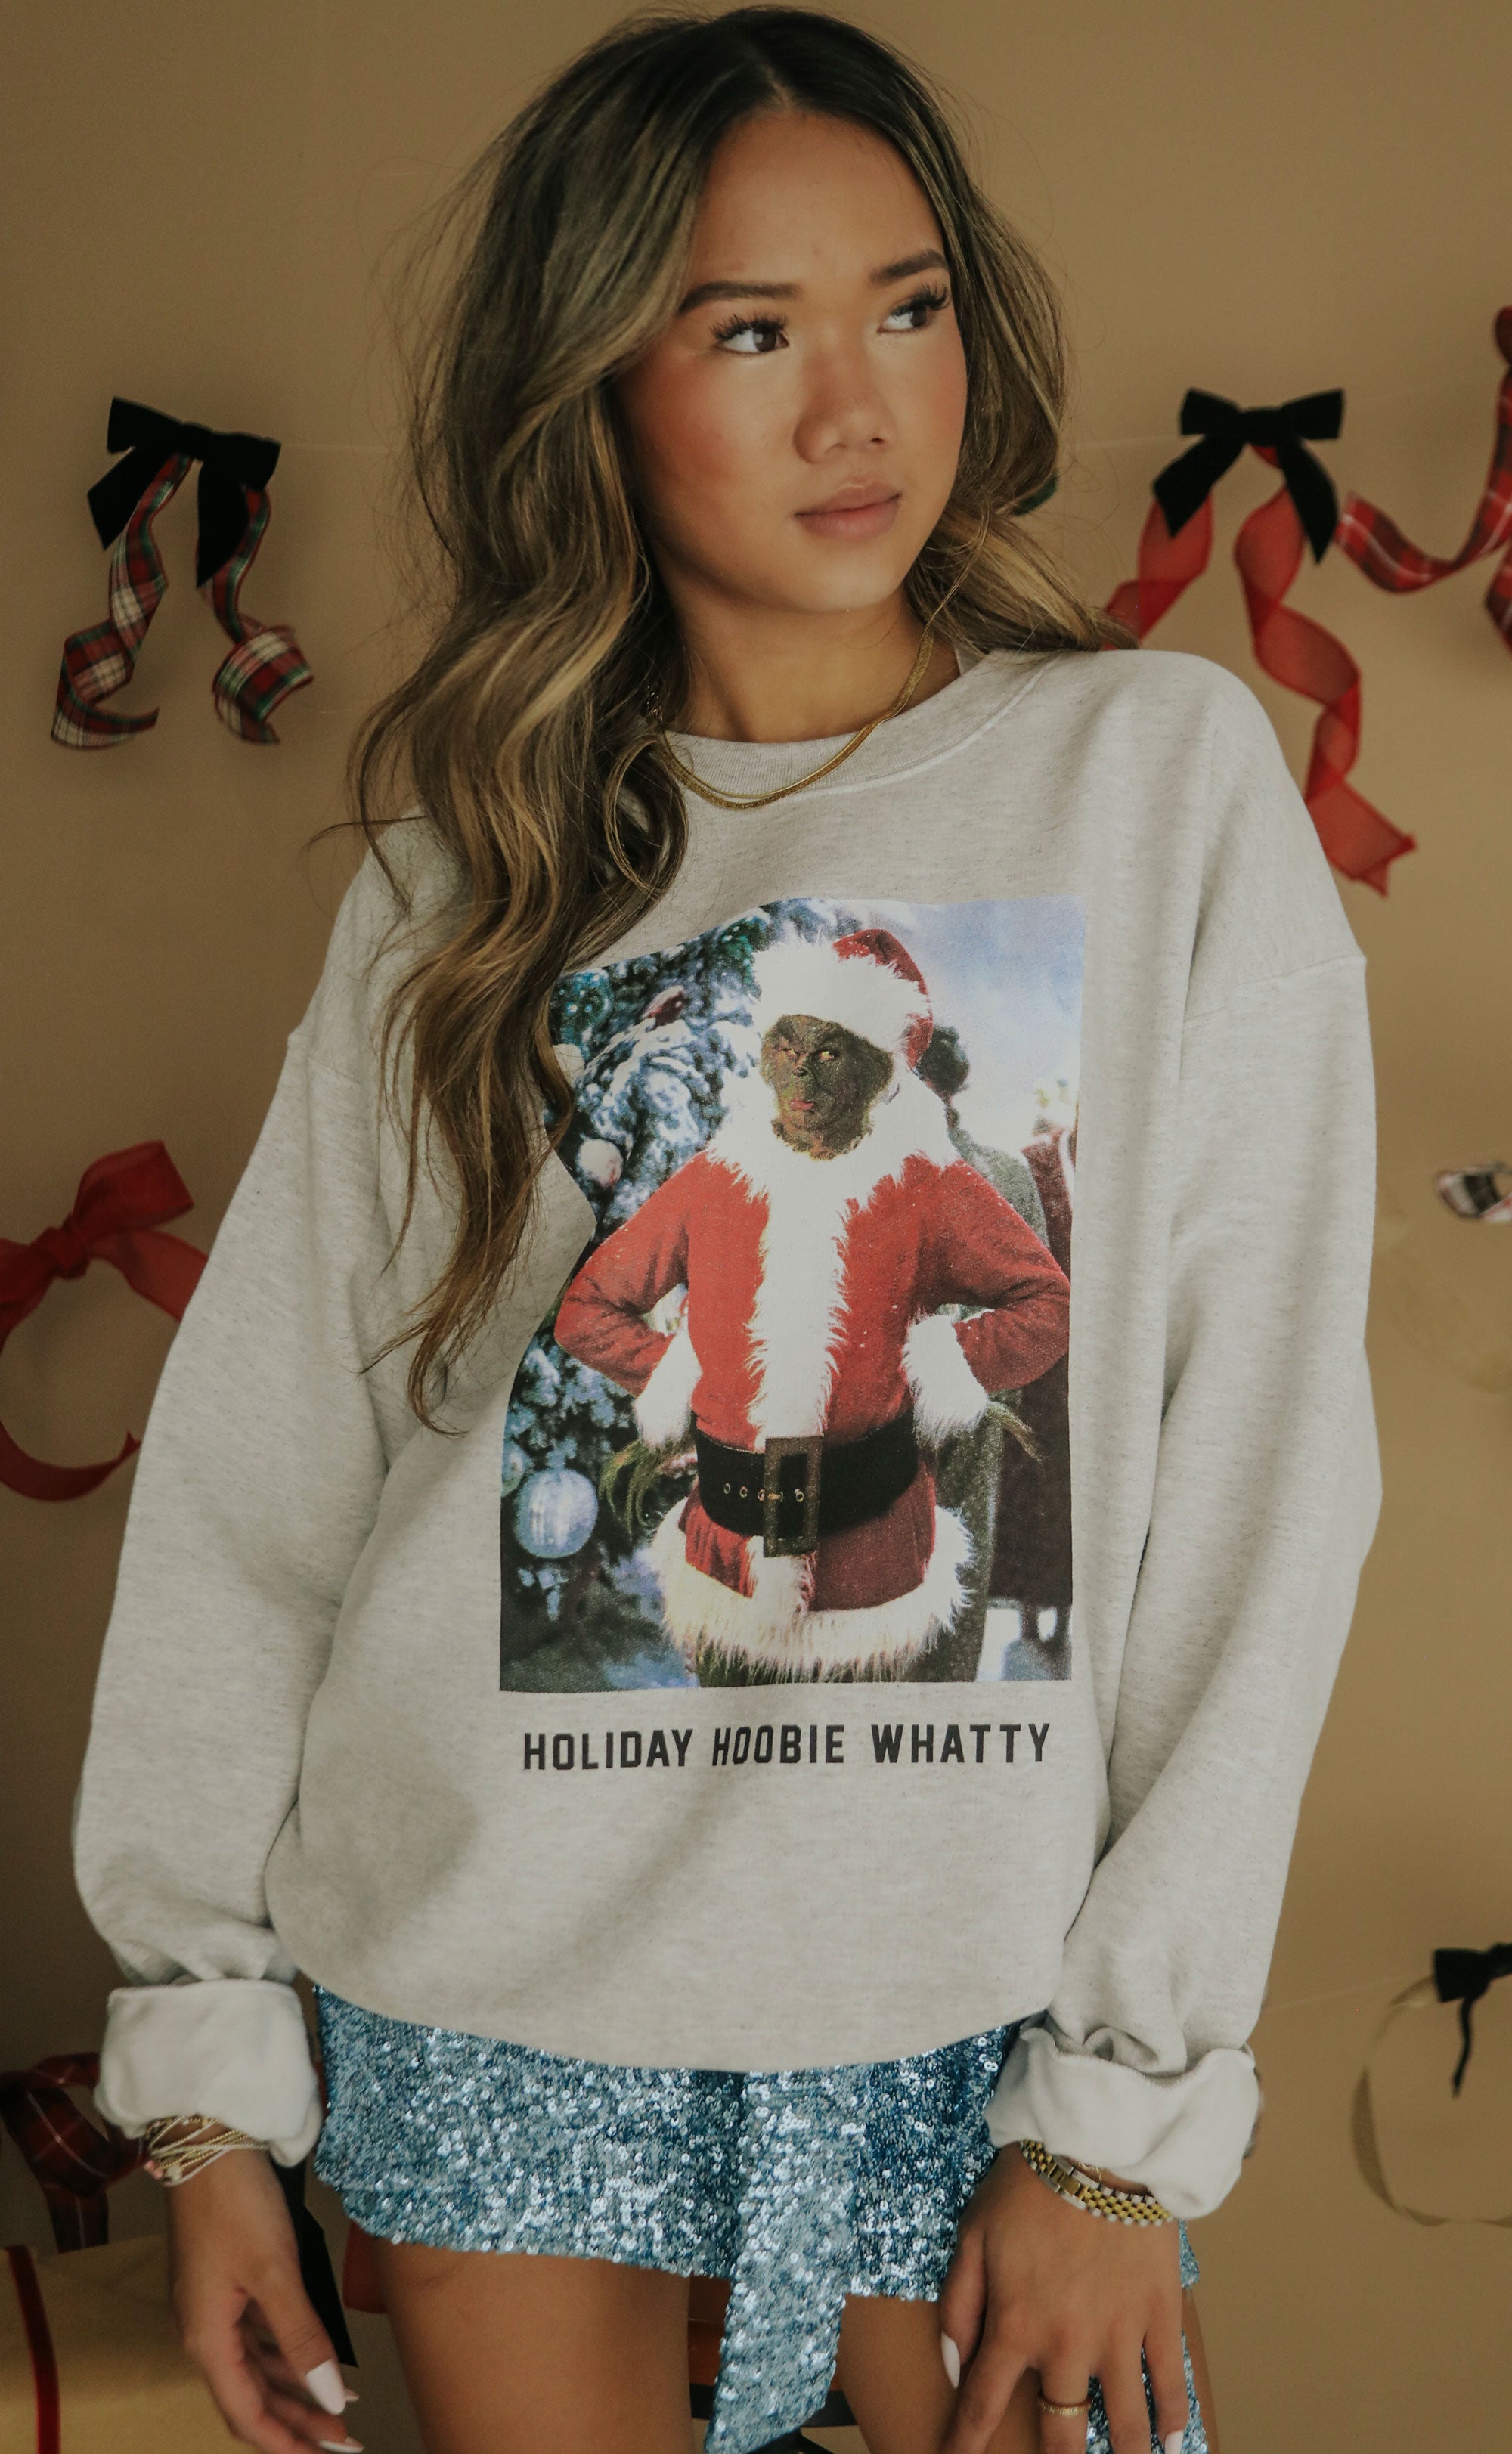 DIY The Grinch Holiday Cheermeister Sweater